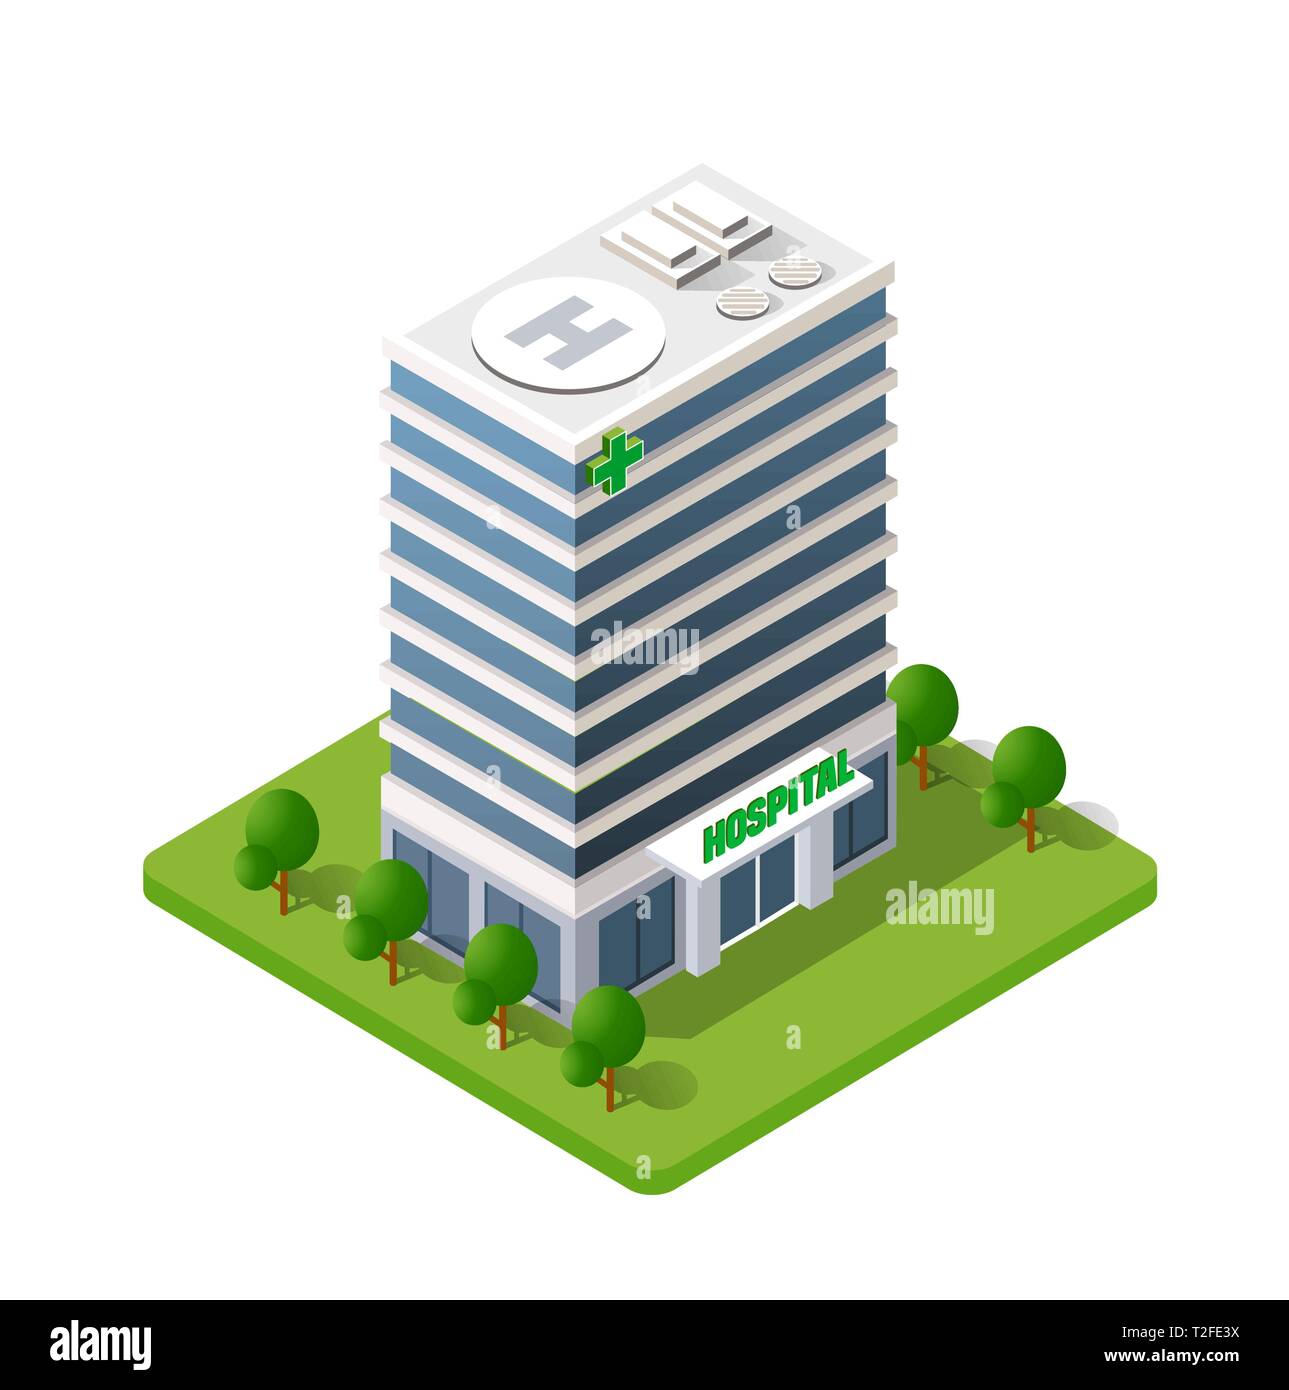 Hospital Isometric 3d Building Health Urban of architecture Infrastructure ambulance and modern house concept icon Stock Vector